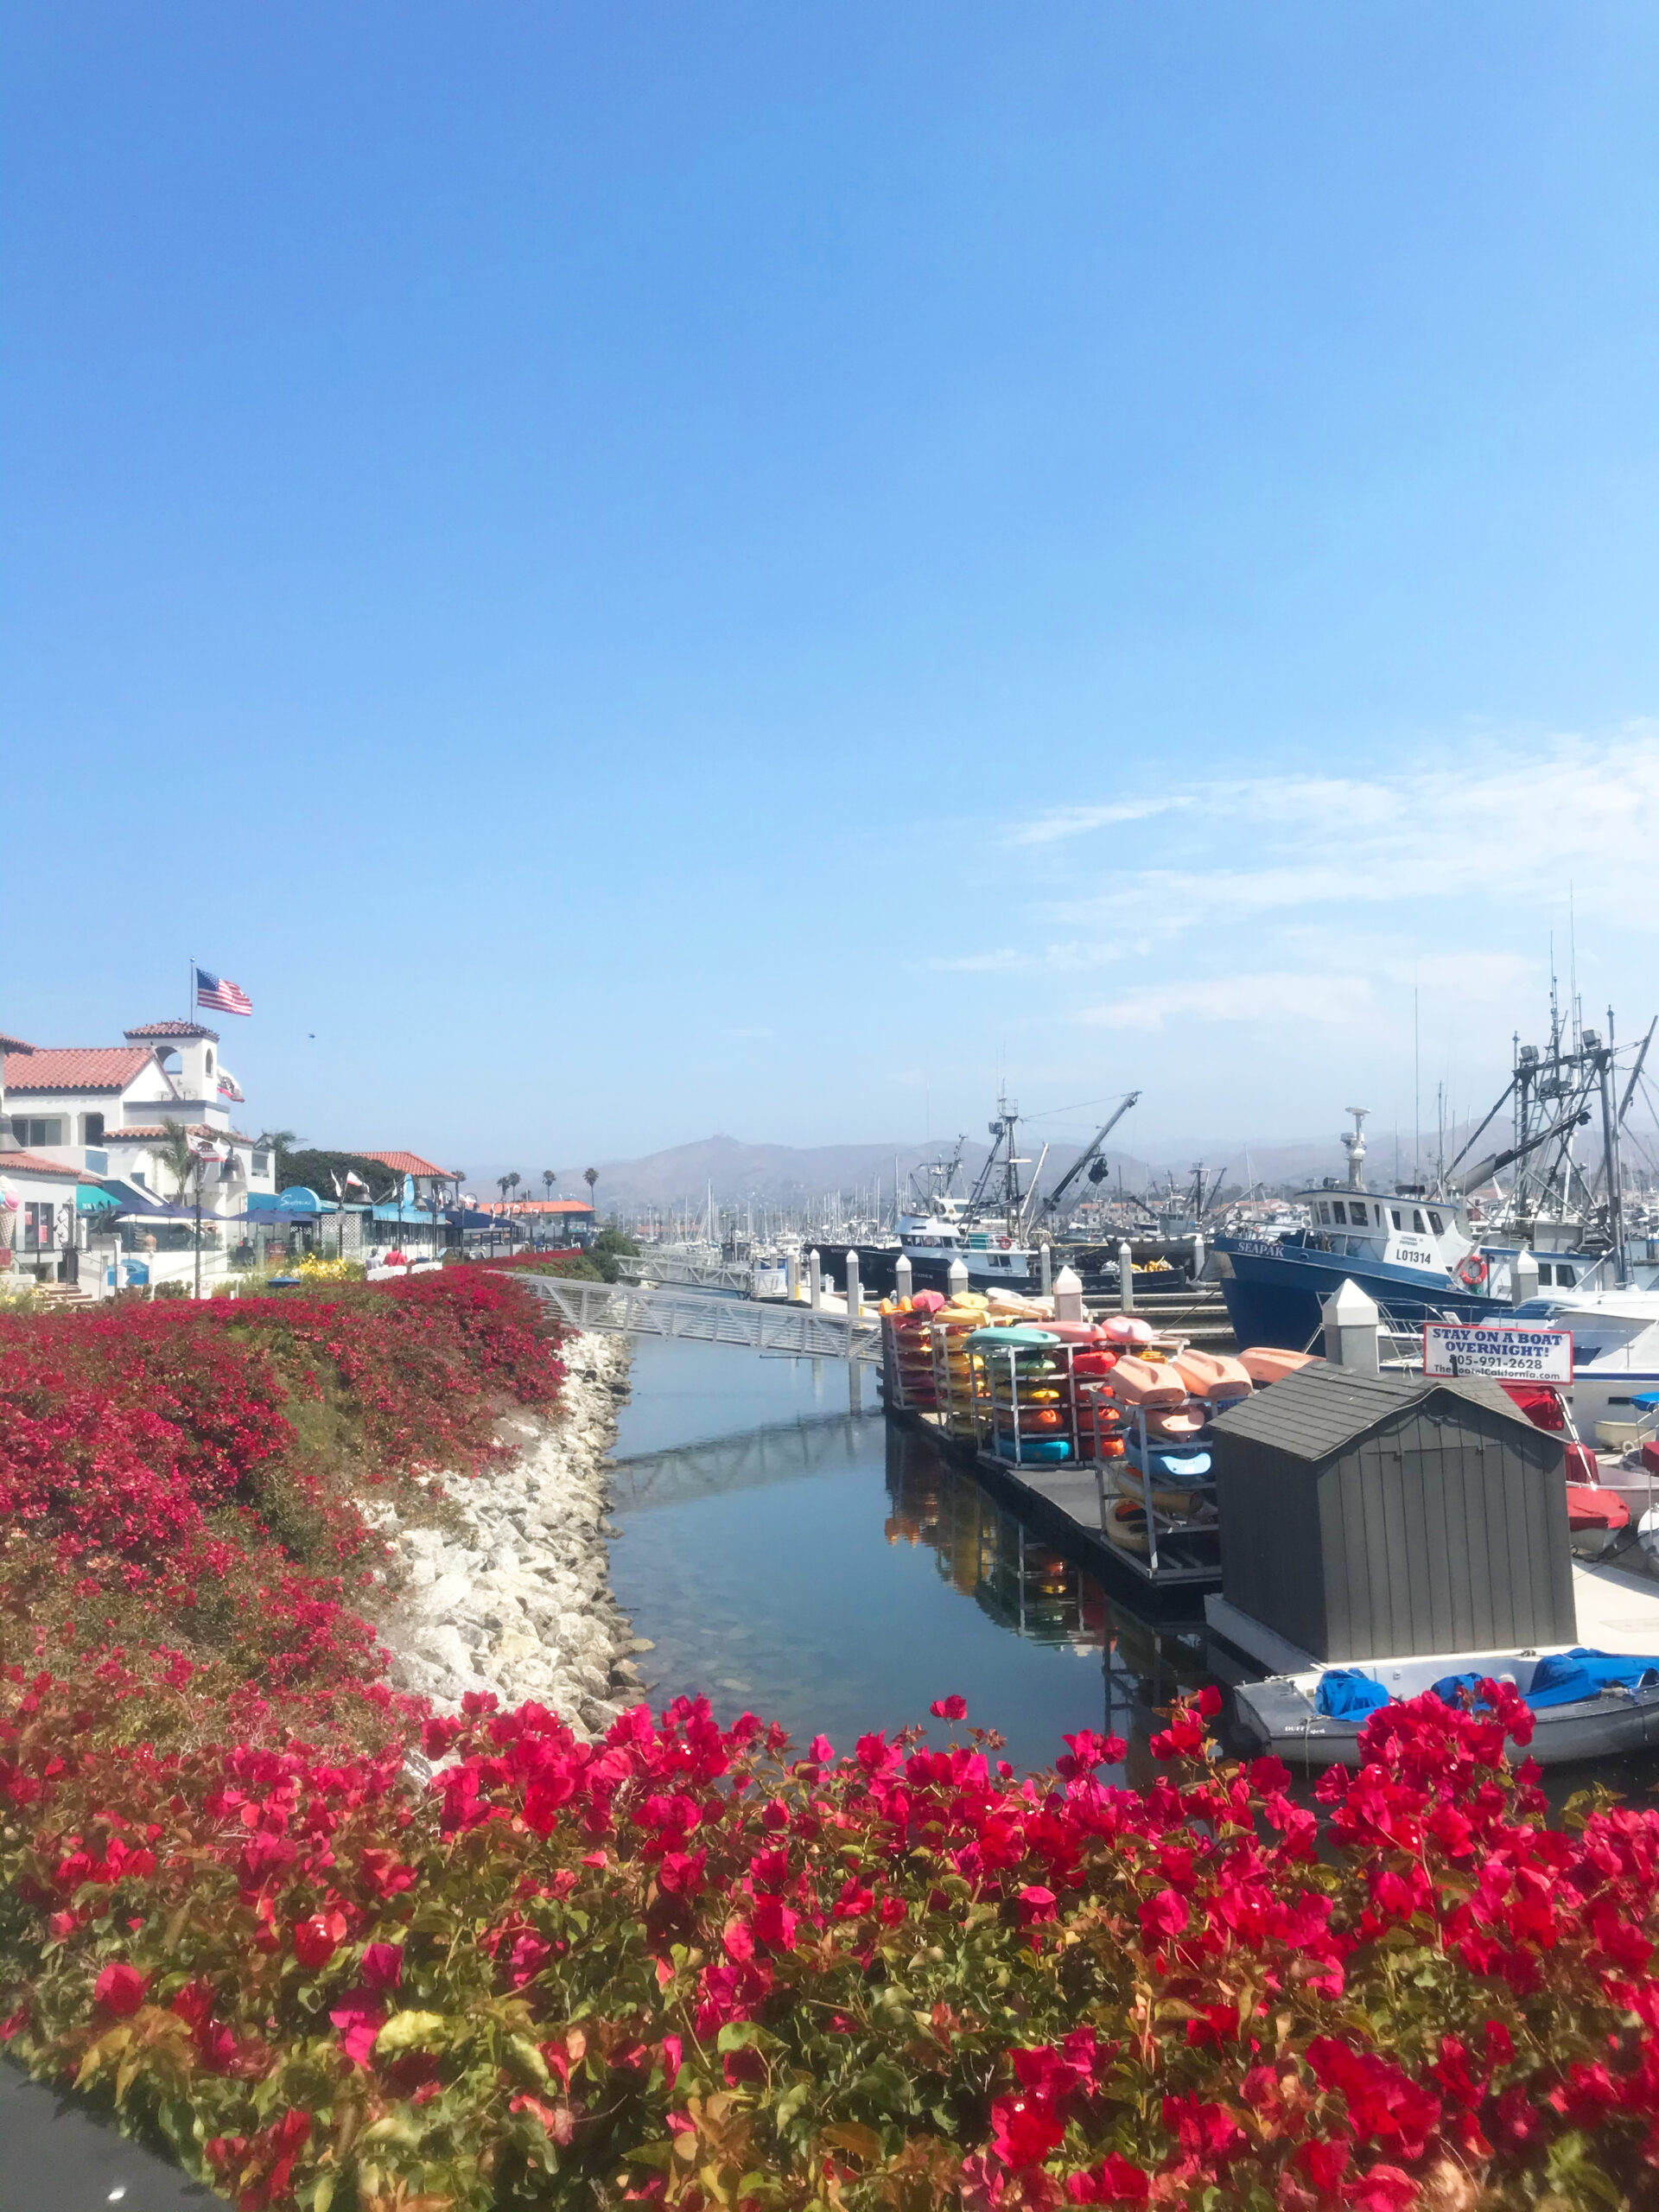 Shops and Harbor in Ventura